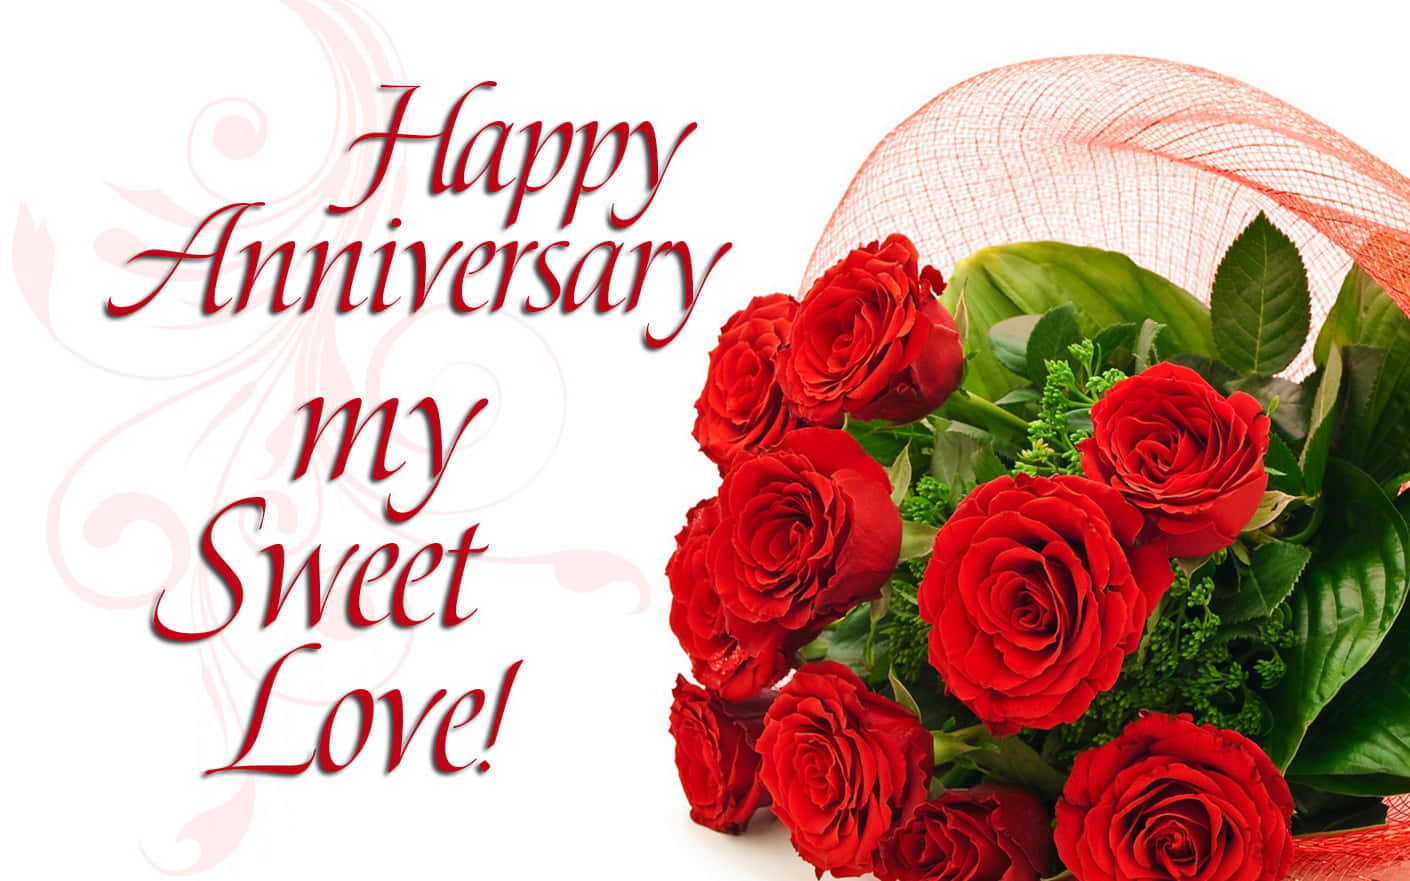 happy anniversary images Pics Wallpaper for Whatsapp  Good Morning Images   Good Morning Photo HD Downlaod  Good Morning Pics Wallpaper HD